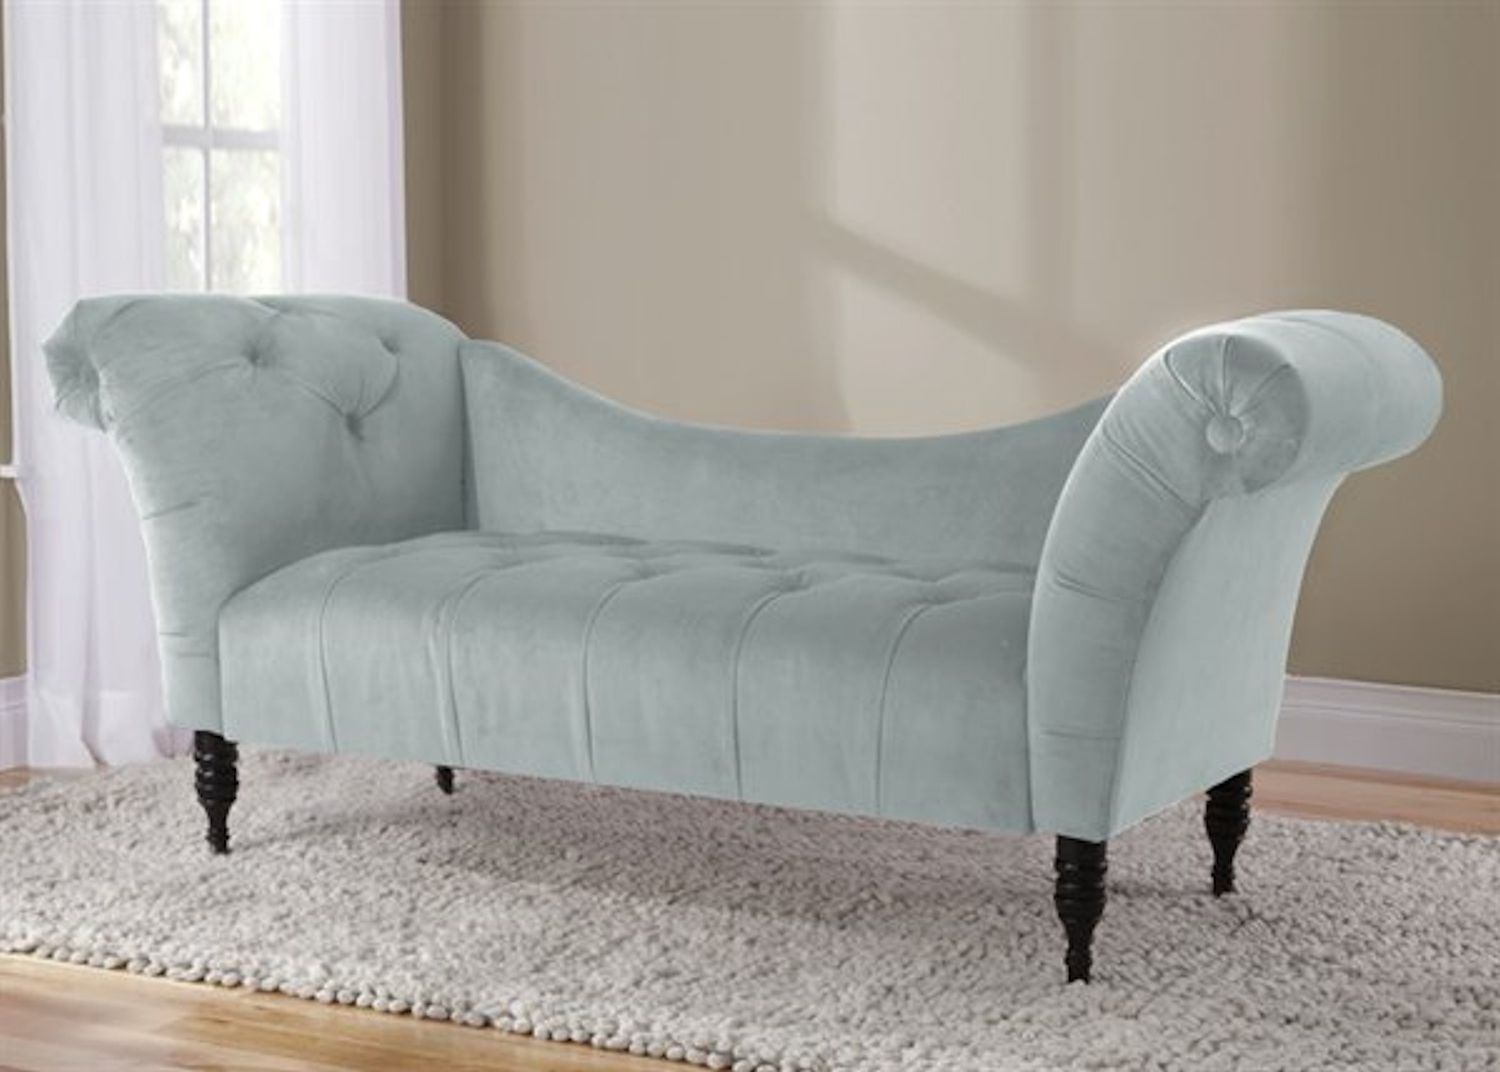 Widely Used Velvet Tufted Chaise Lounge – Poolskyline Furniture – Home Intended For Velvet Chaise Lounges (View 3 of 15)